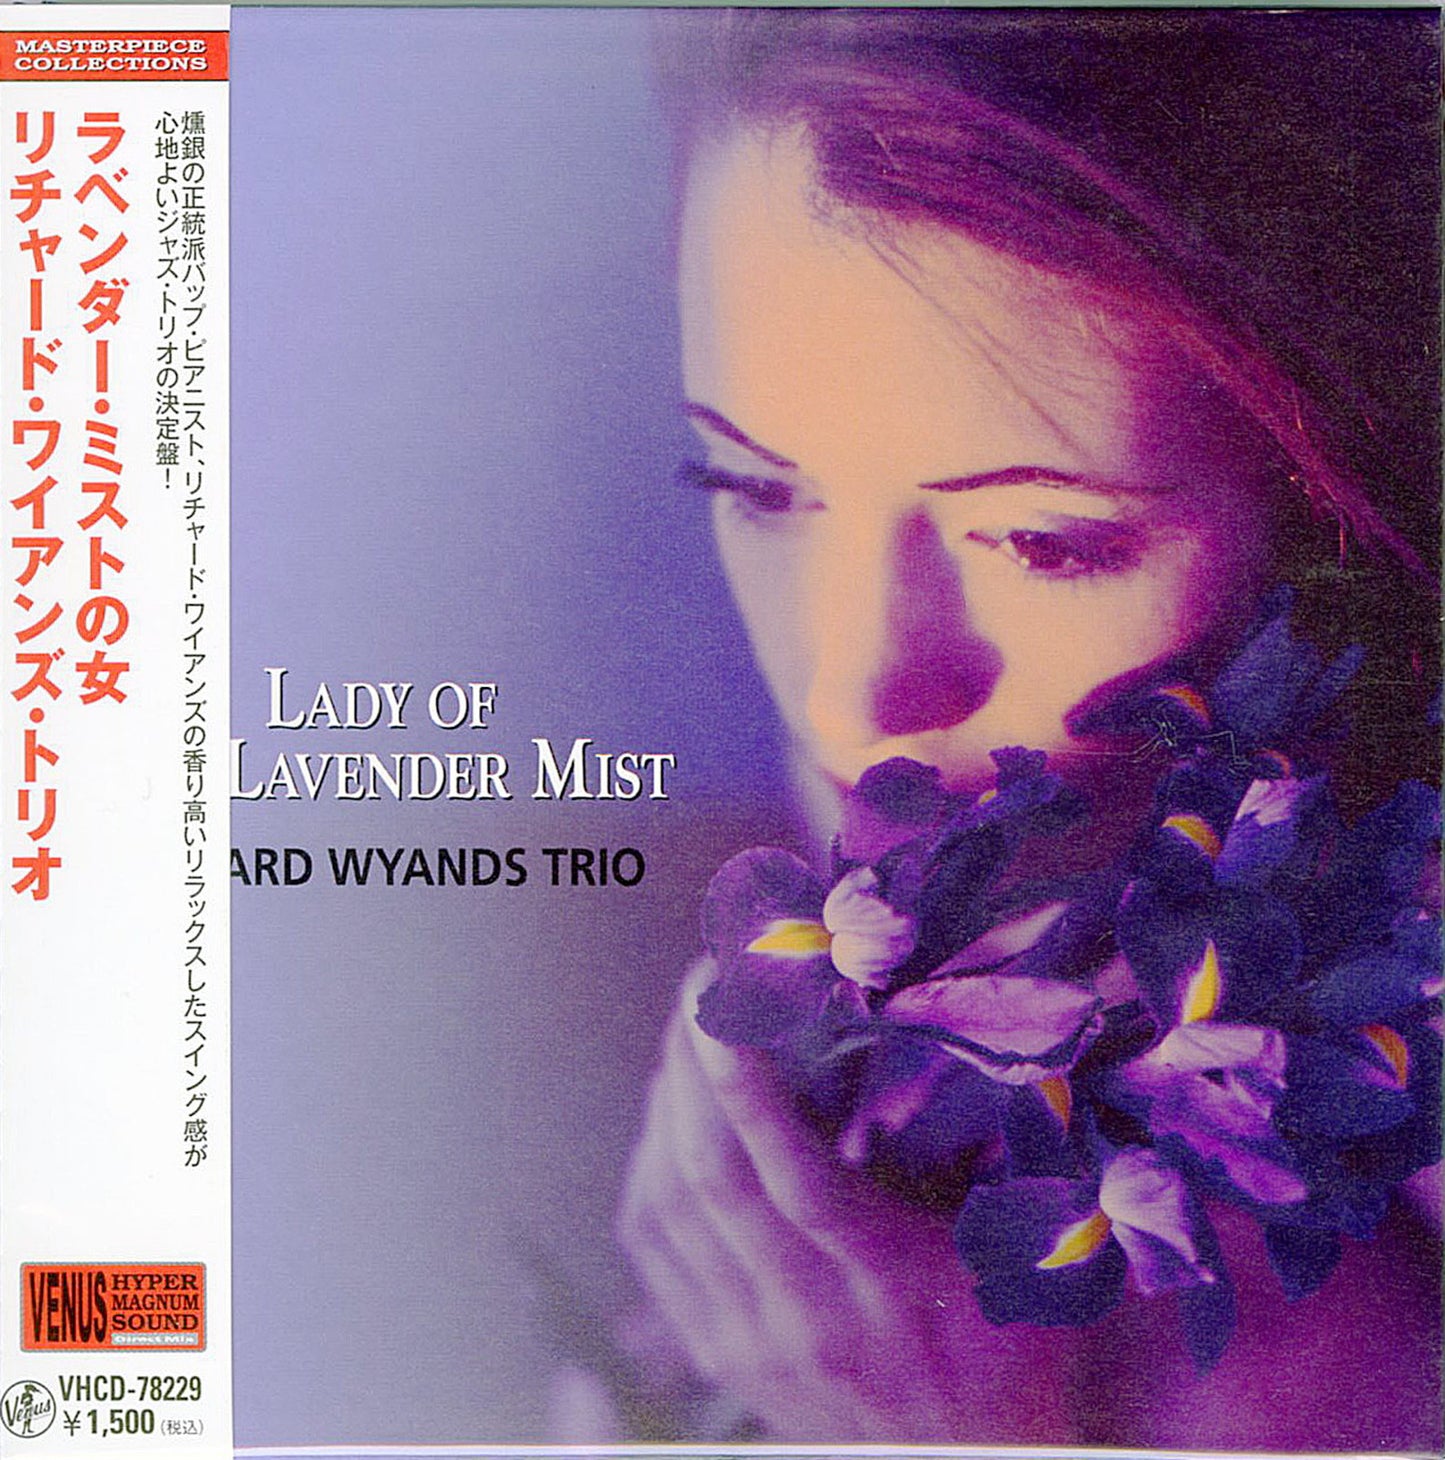 Richard Wyands Trio - Lady Of The Lavender Mist (Release year: 2011) - Mini LP CD